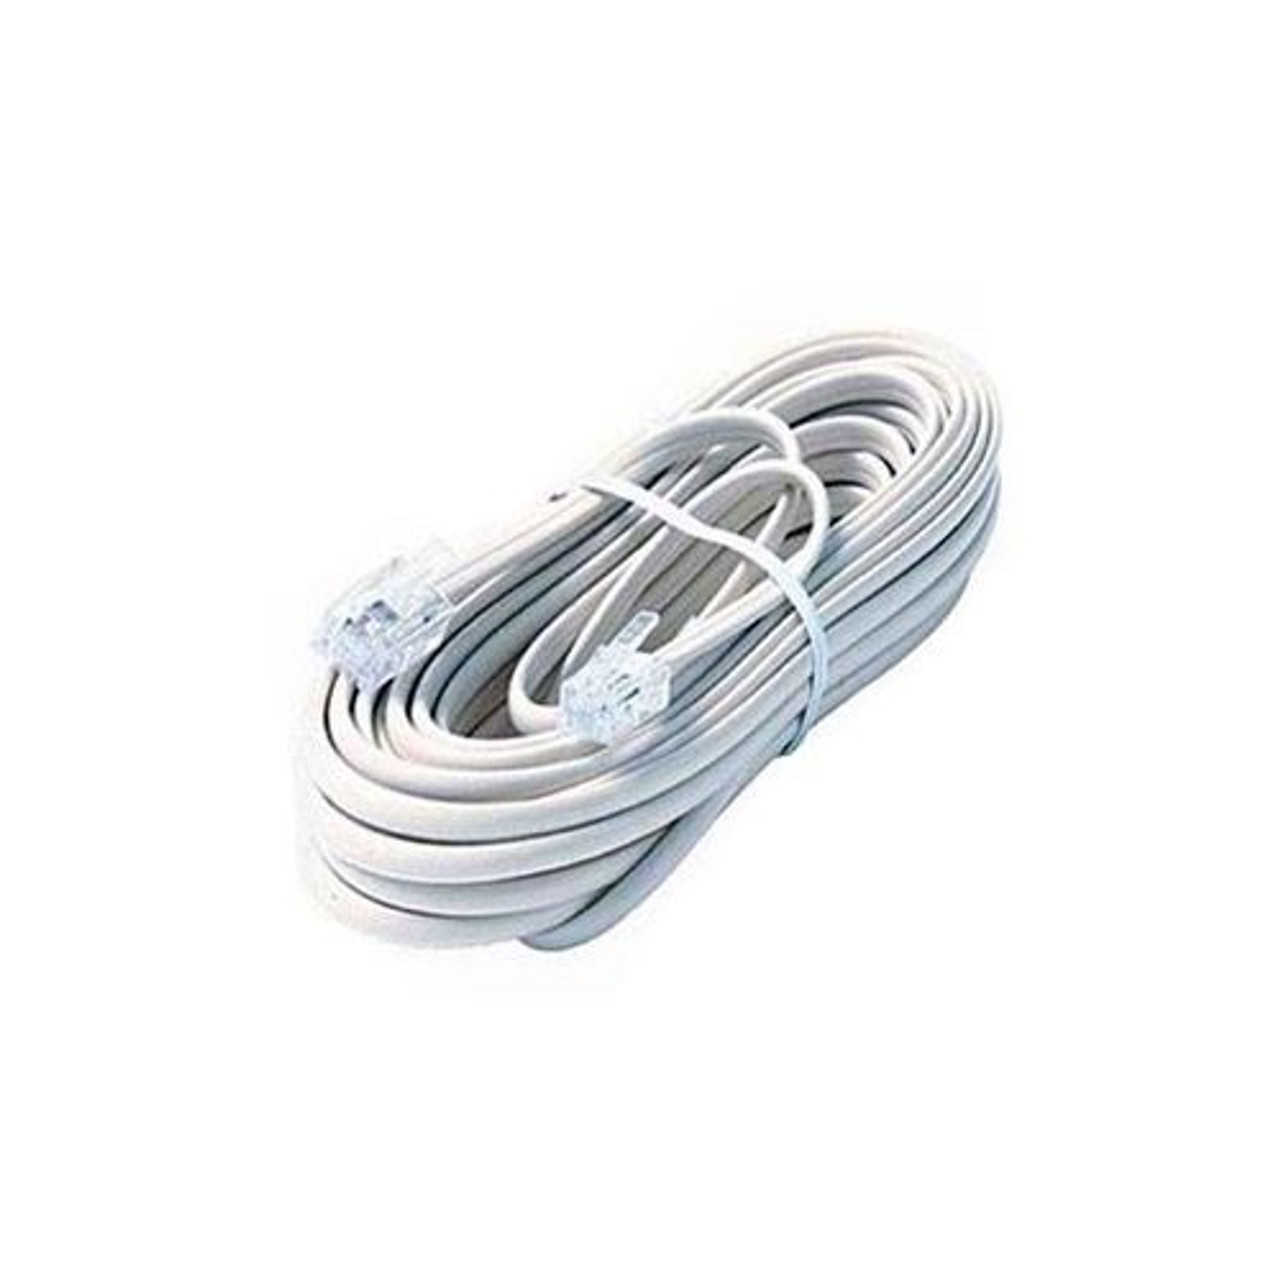 Steren 304-025WH 25' FT 4-Conductor Phone Line Cord White Plug Connector Each End Flat Telephone Cord Cable 6P4C Cord Cross-Wired for VoIP Cable Line Connector, Part # 304025-WH